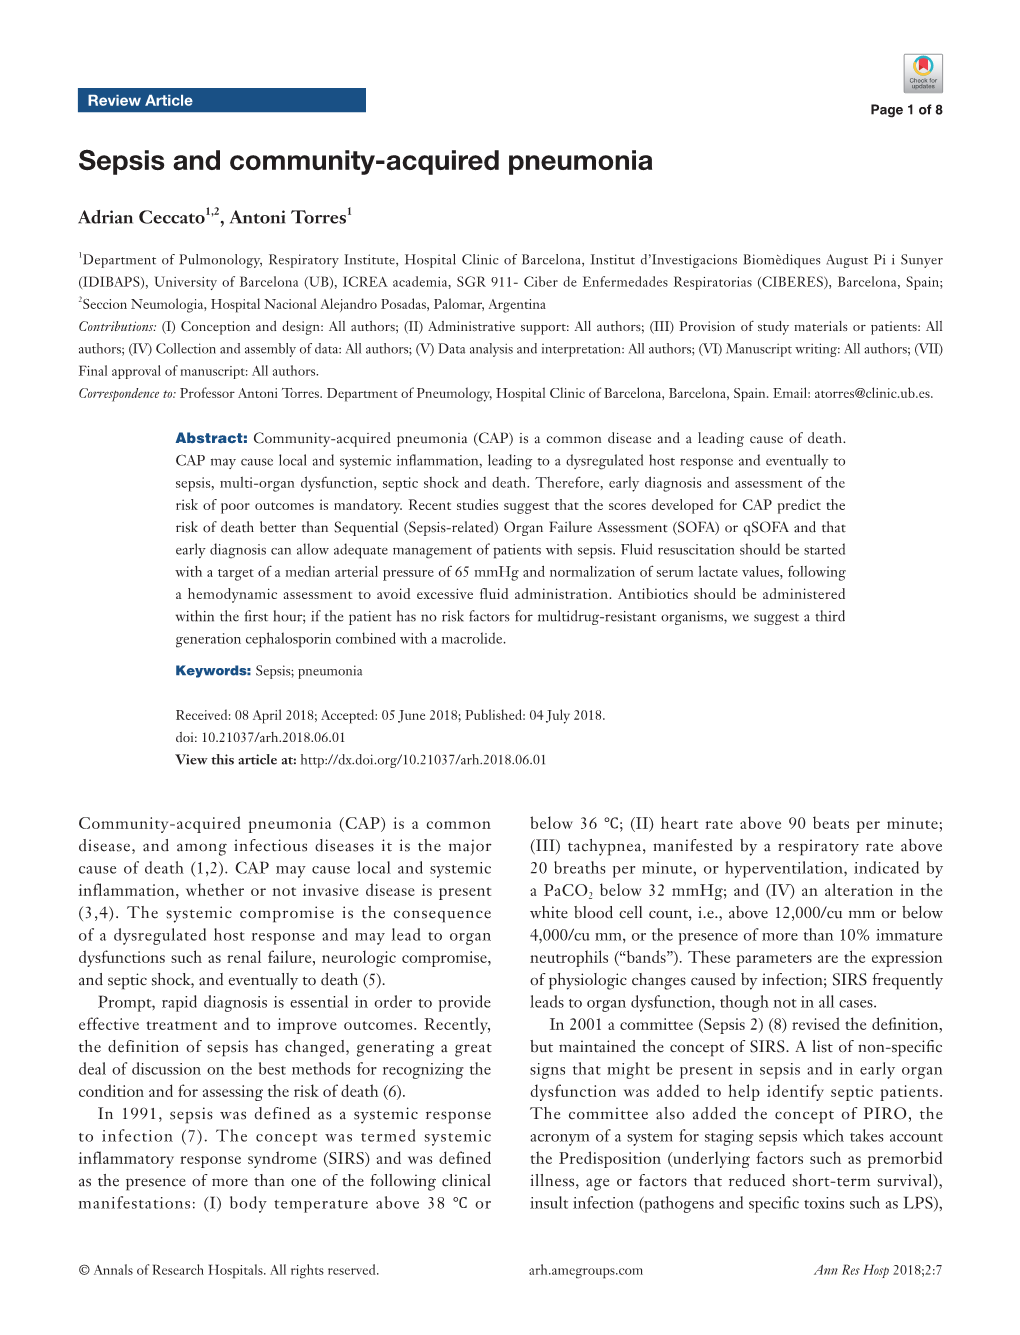 Sepsis and Community-Acquired Pneumonia